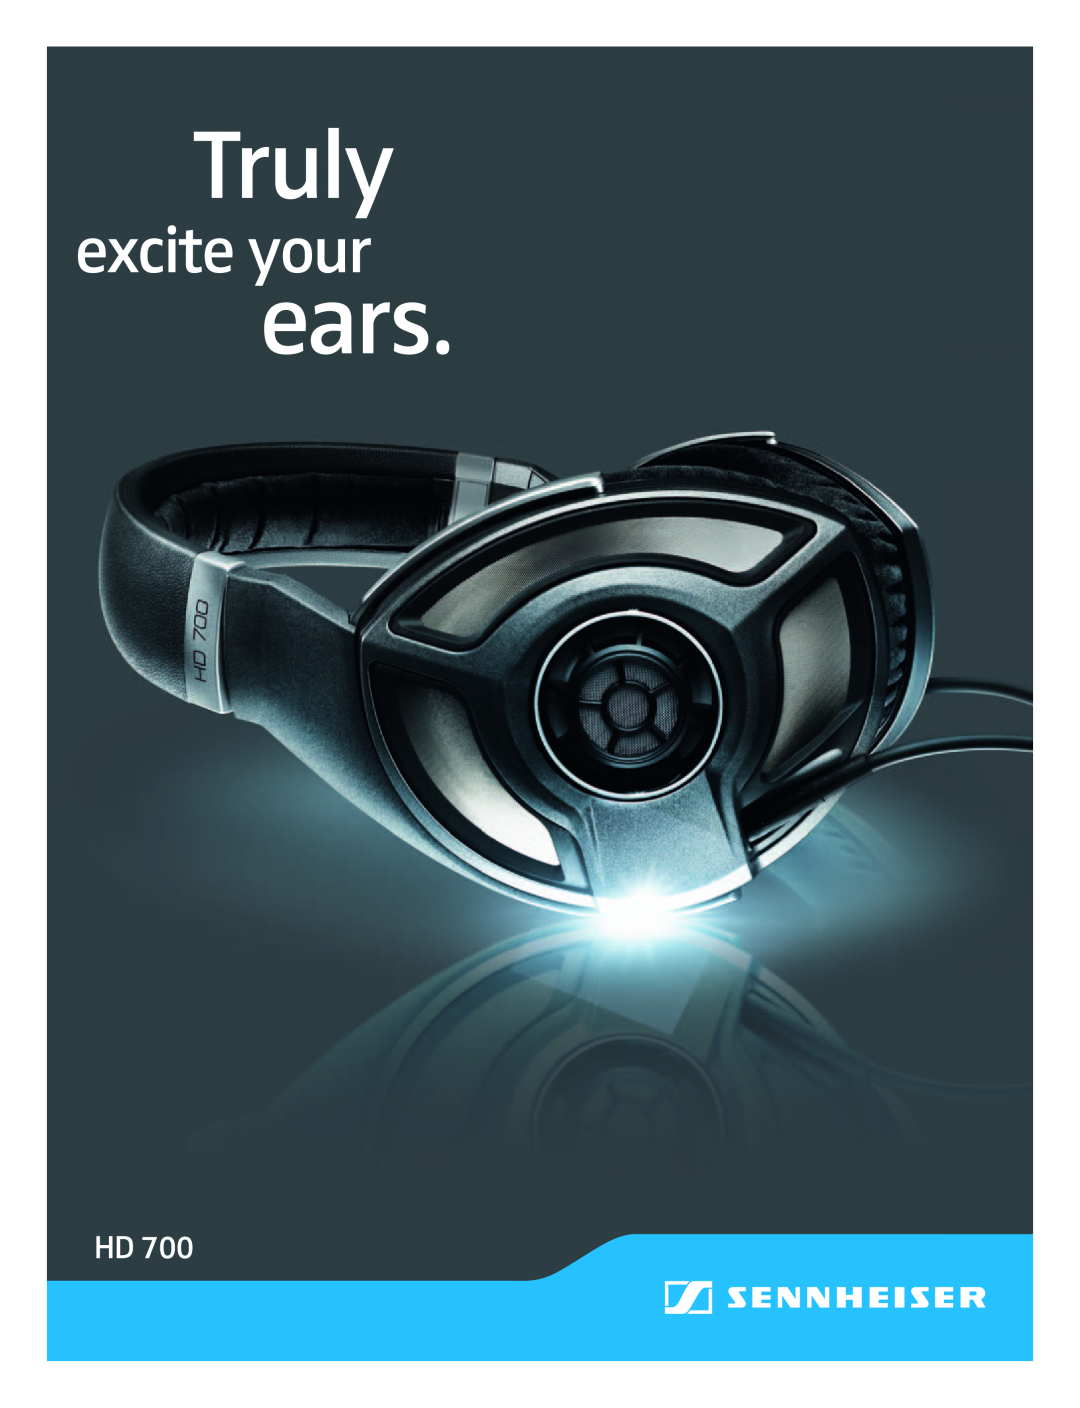 Sennheiser HD 700 manual Truly, ears, excite your 